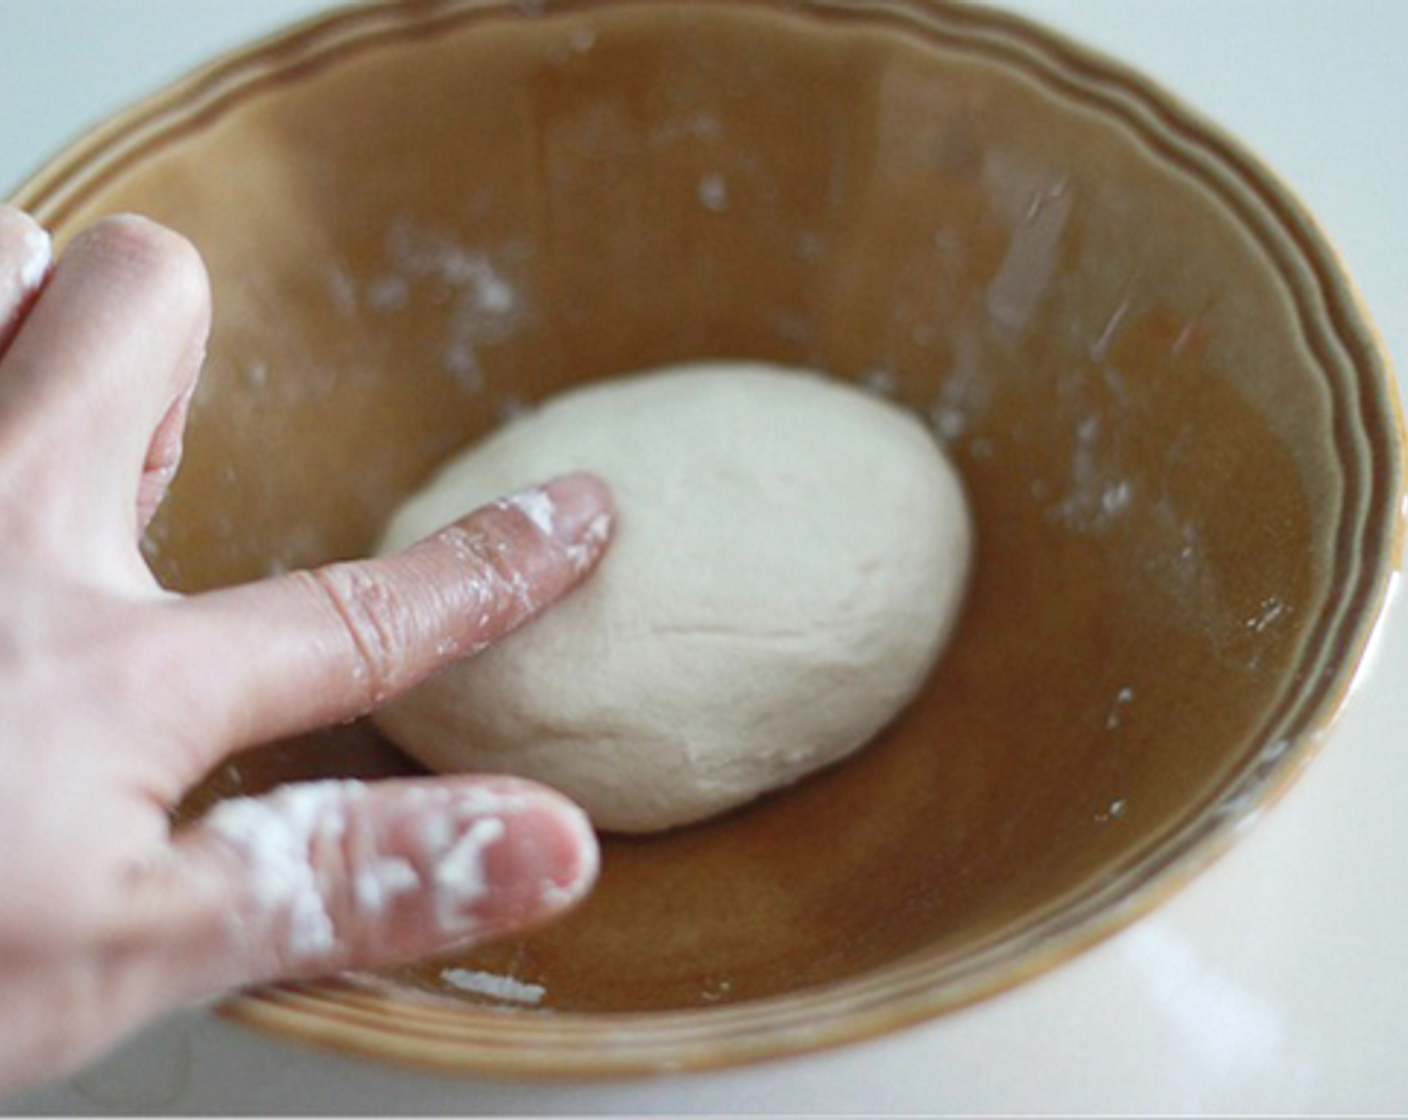 step 6 Mix the Sweet Glutinous Rice Flour (1/2 cup), Silken Tofu (2.5 oz), and Unsweetened Cocoa Powder (2 Tbsp), and knead with your hand until the dough becomes smooth. If the mixture is too dry, add a little tofu, until the dough is just right.